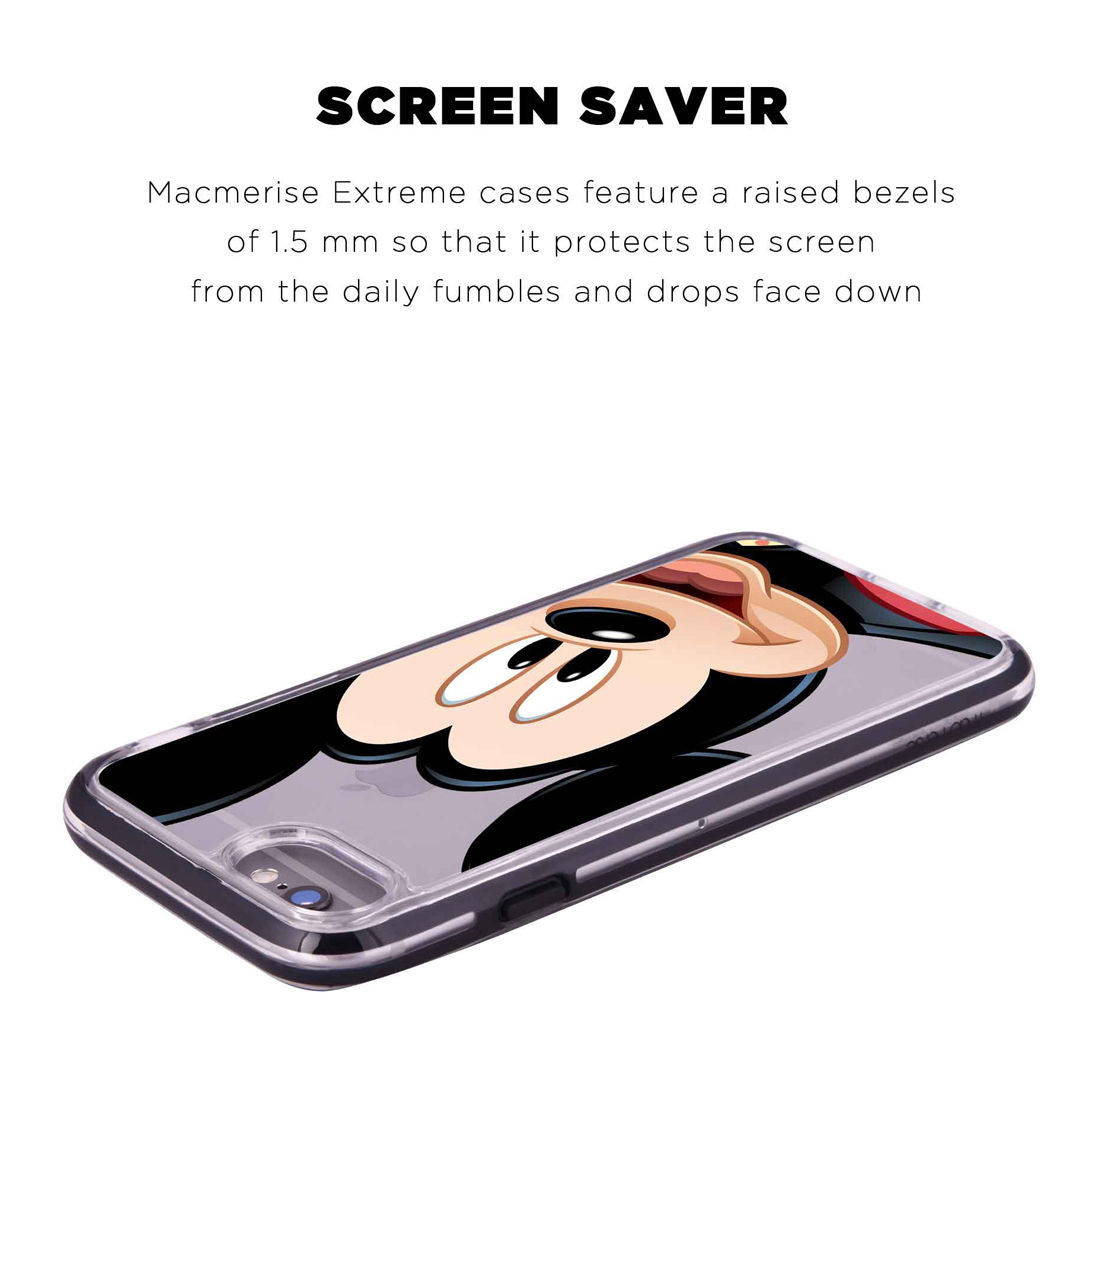 Zoom Up Mickey - Extreme Phone Case for iPhone 6S